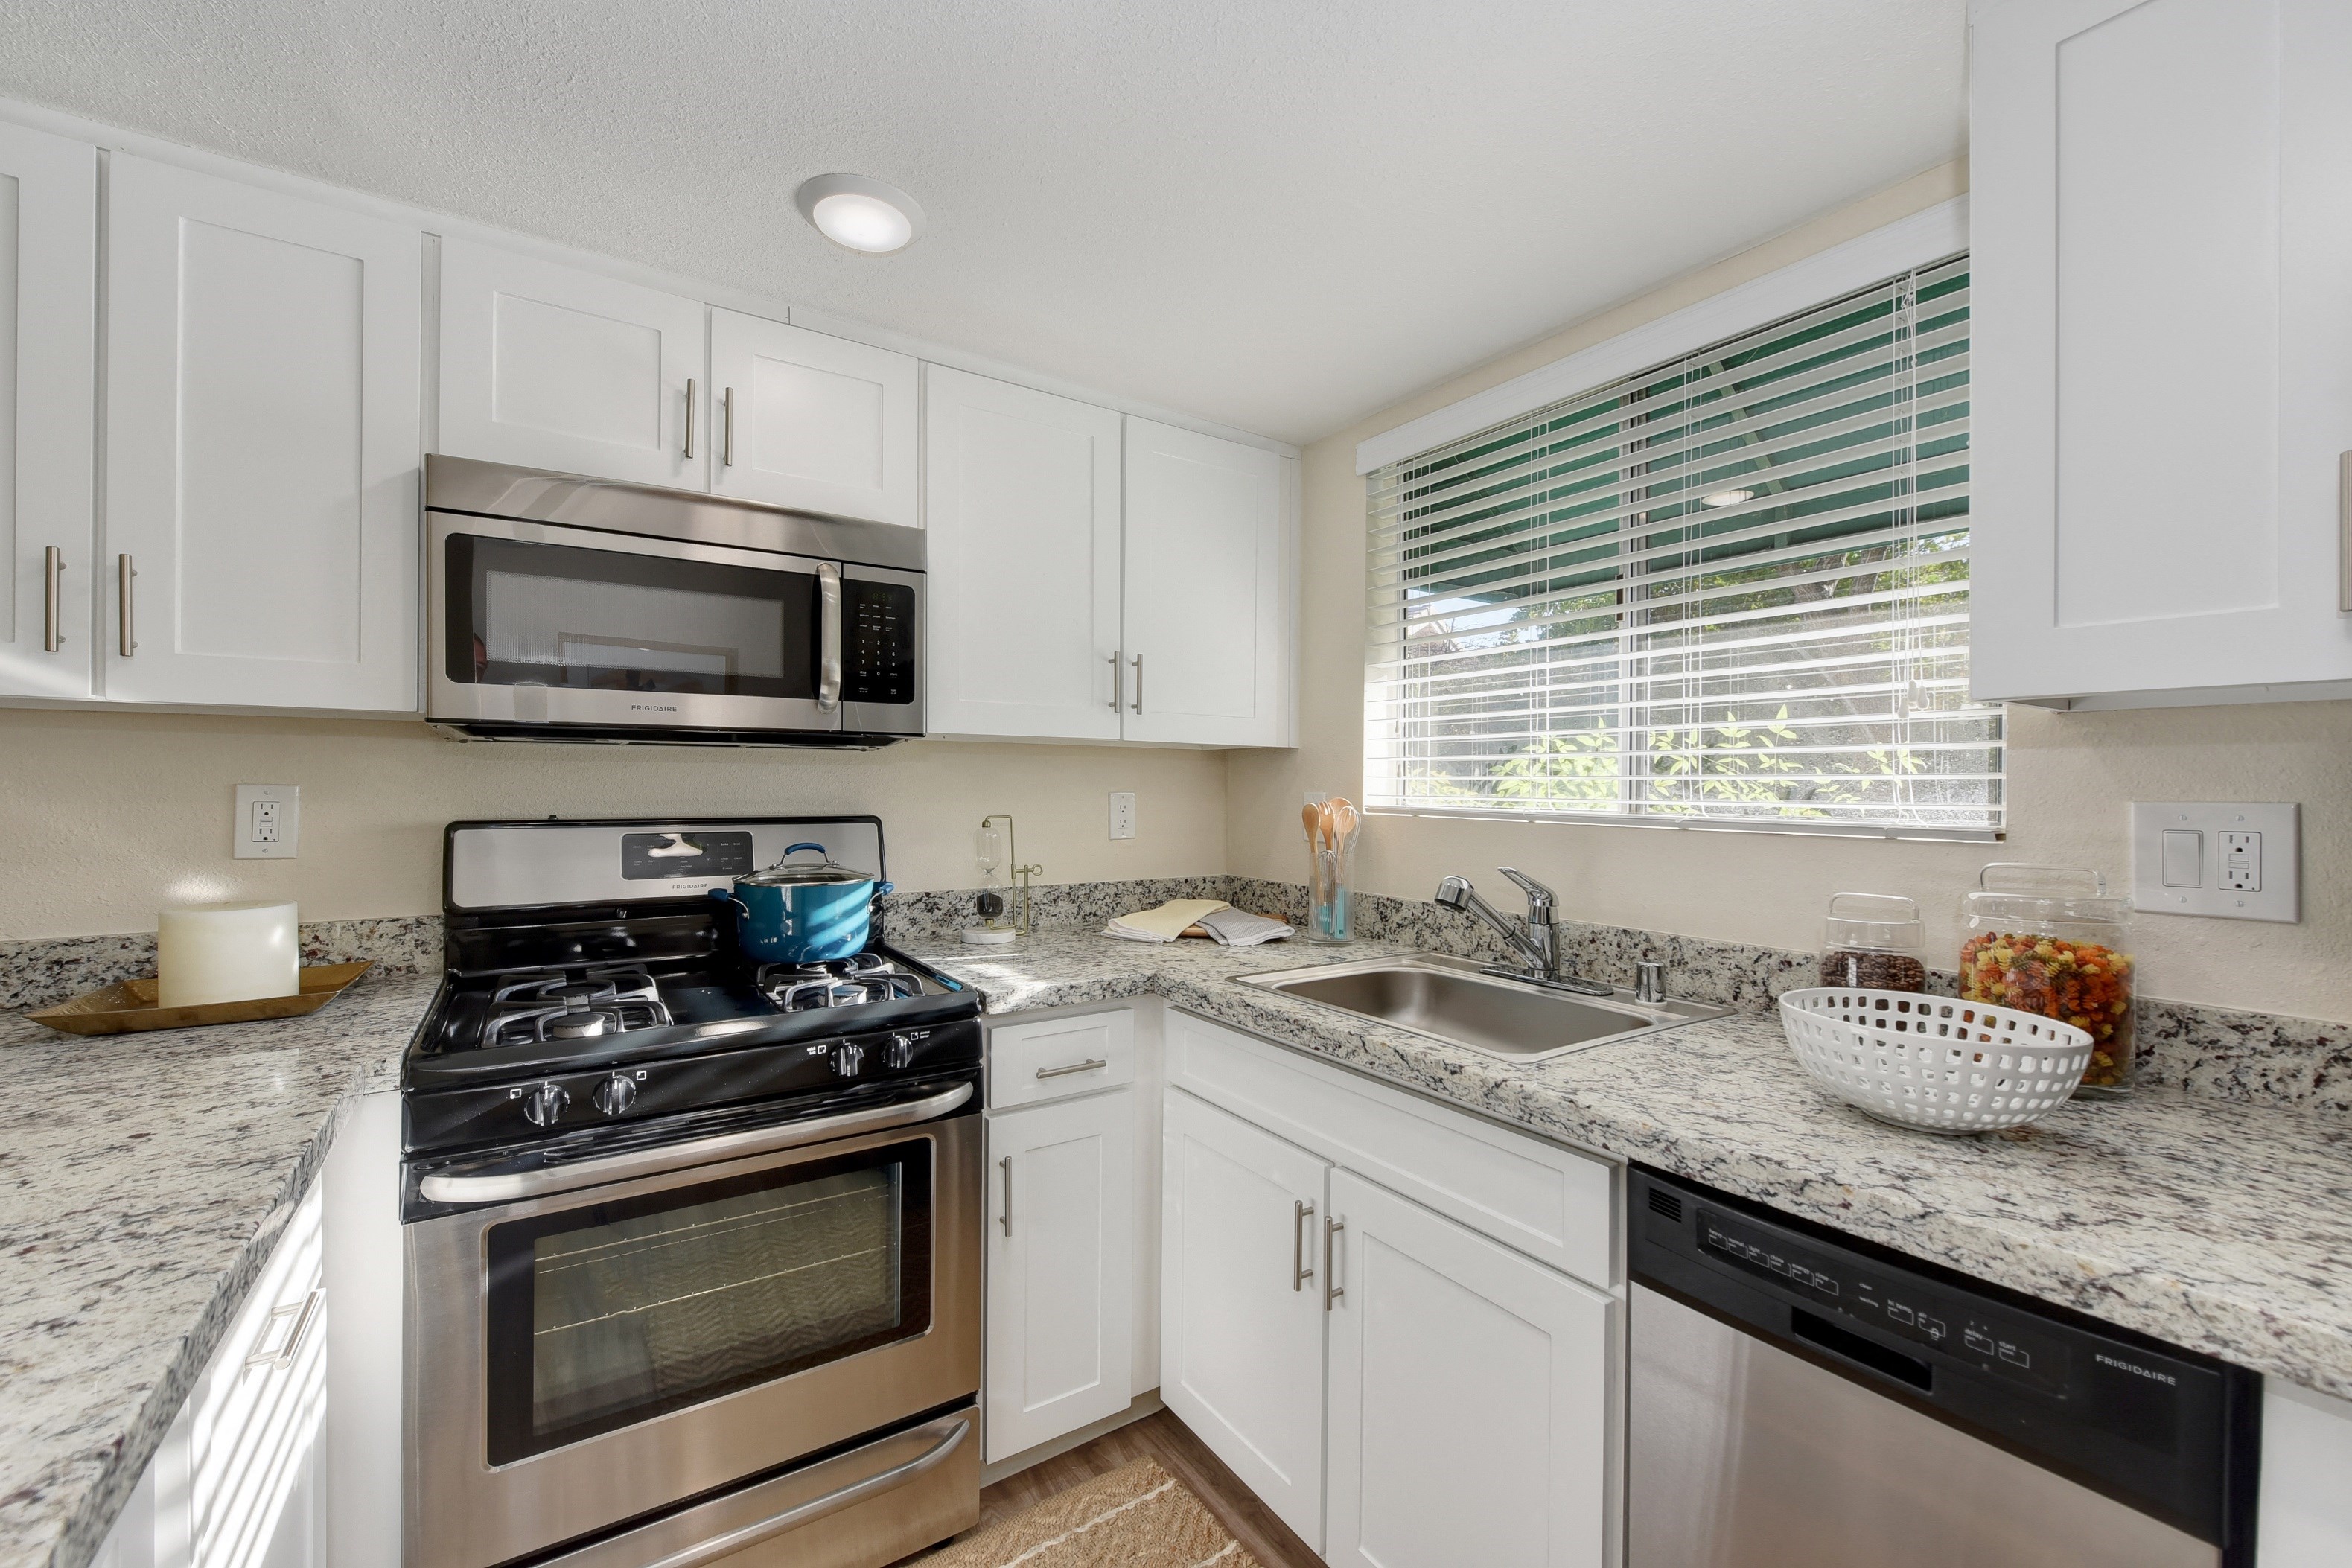 Kitchen with Granite Countertops, White Cabinets, Oven and Microwave